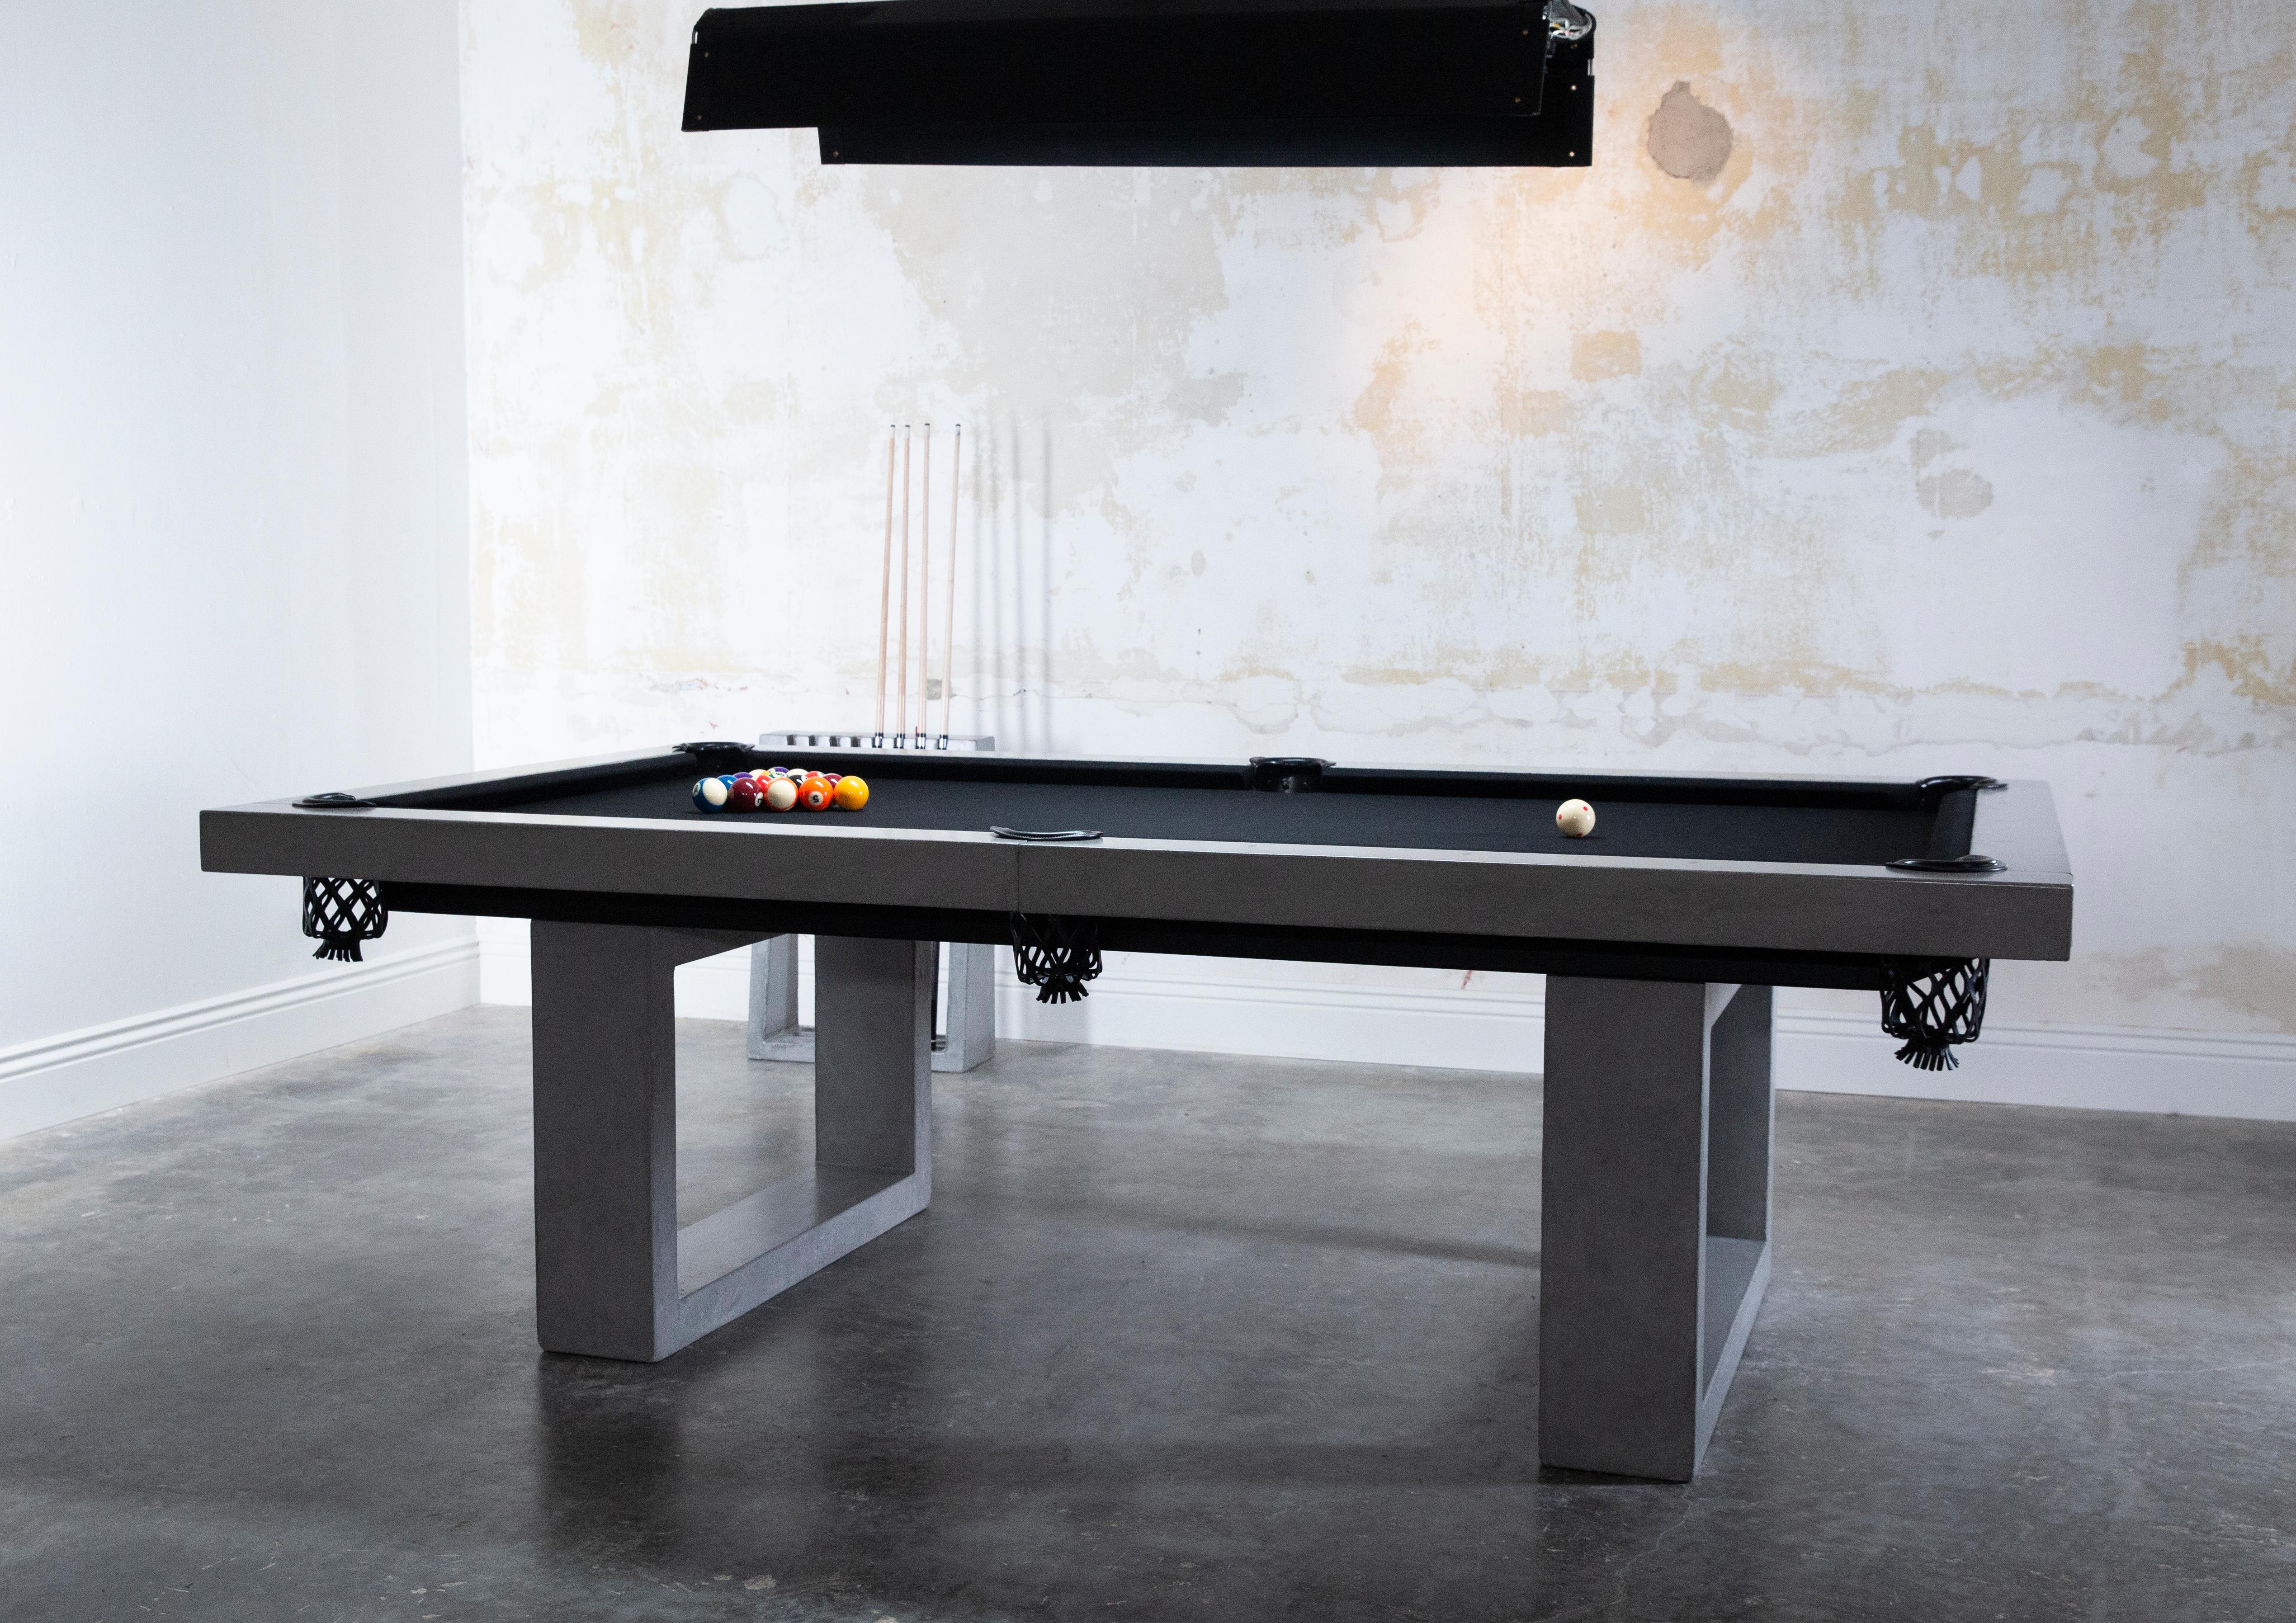 American James de Wulf 7' Concrete Pool Table and Cue Rack, Available Now